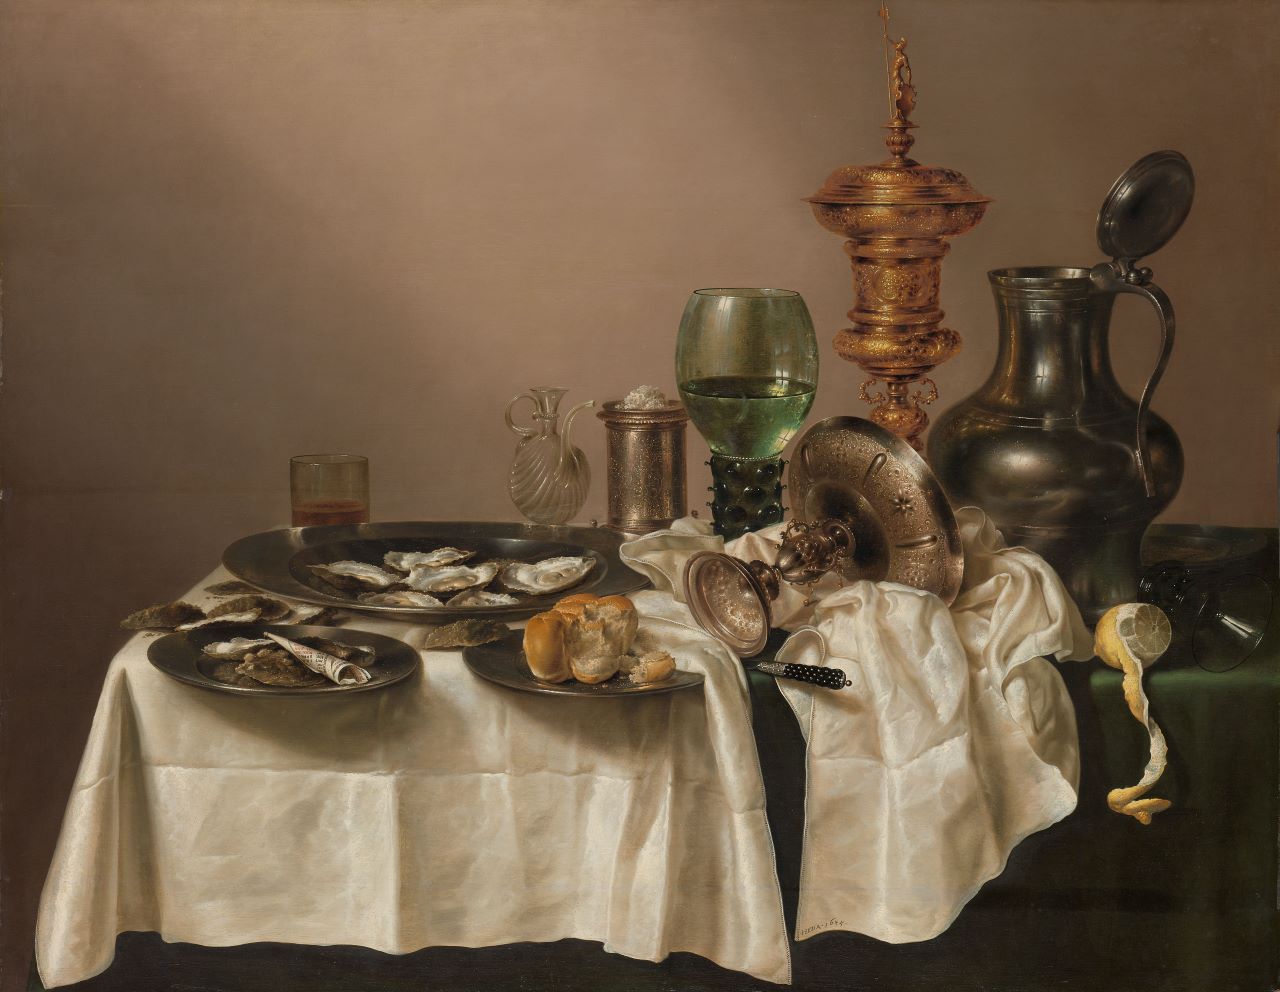 Willem Claesz. Heda, Dutch, Still Life with a Gilt Cup, 1635. Oil on panel. Purchased with the support of the Vereniging Rembrandt and the Rijksmuseum-Stichting, The Rijksmuseum, the Netherlands, SK-A-4830. 